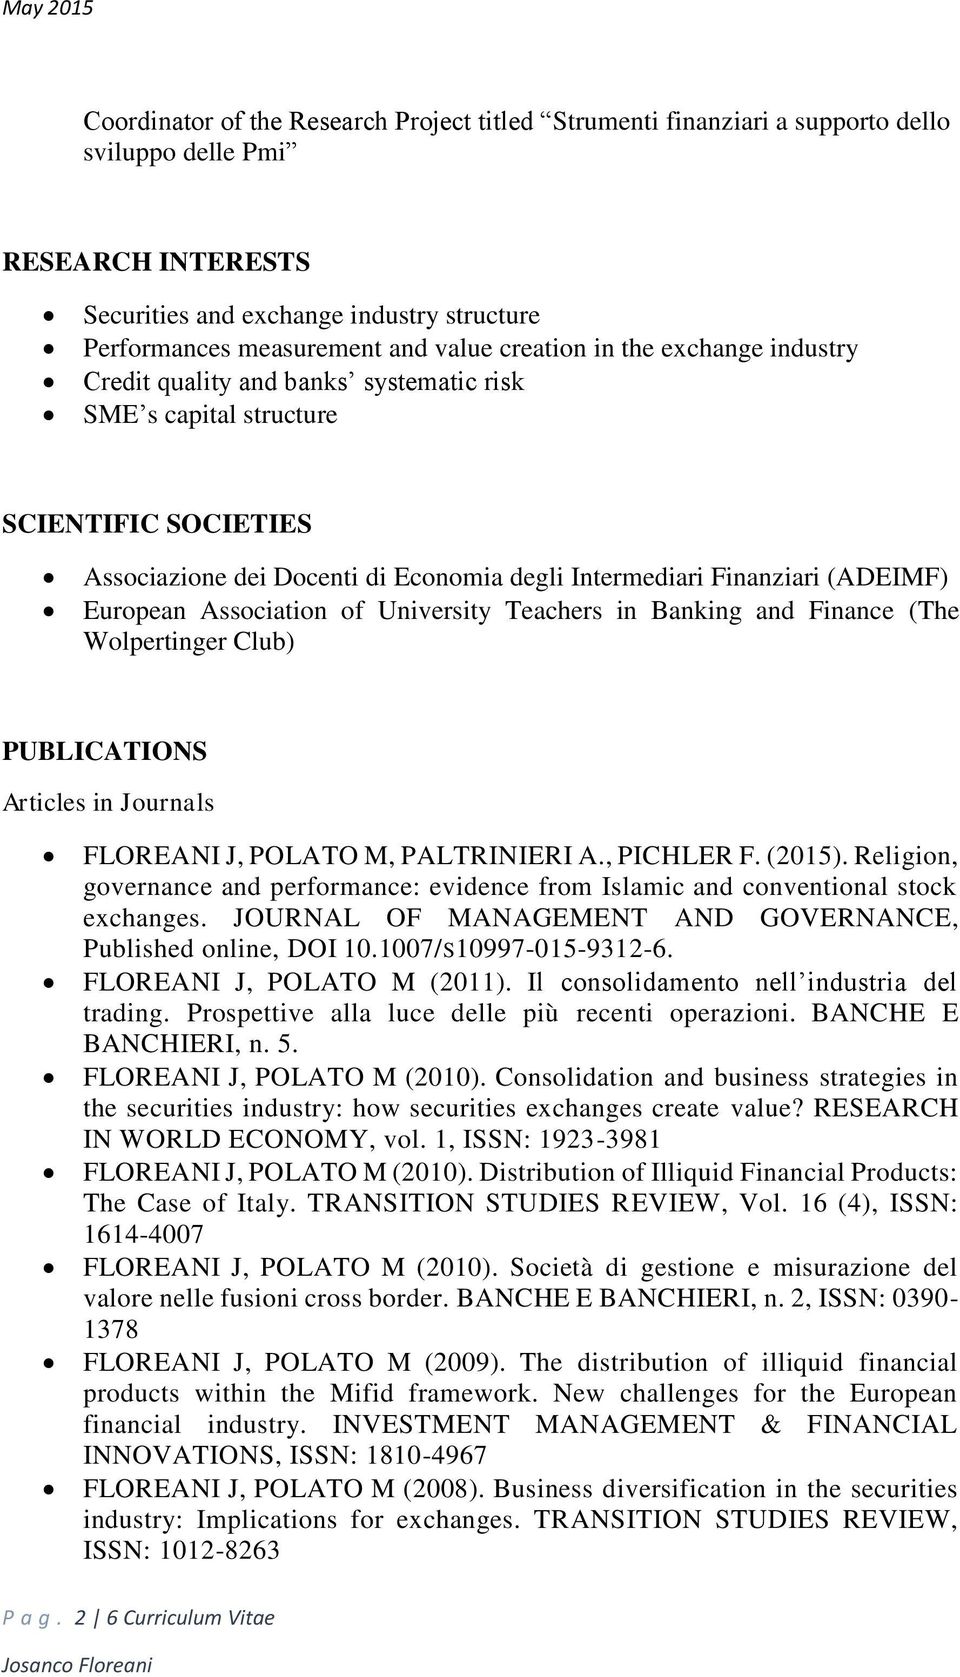 European Association of University Teachers in Banking and Finance (The Wolpertinger Club) PUBLICATIONS Articles in Journals FLOREANI J, POLATO M, PALTRINIERI A., PICHLER F. (2015).